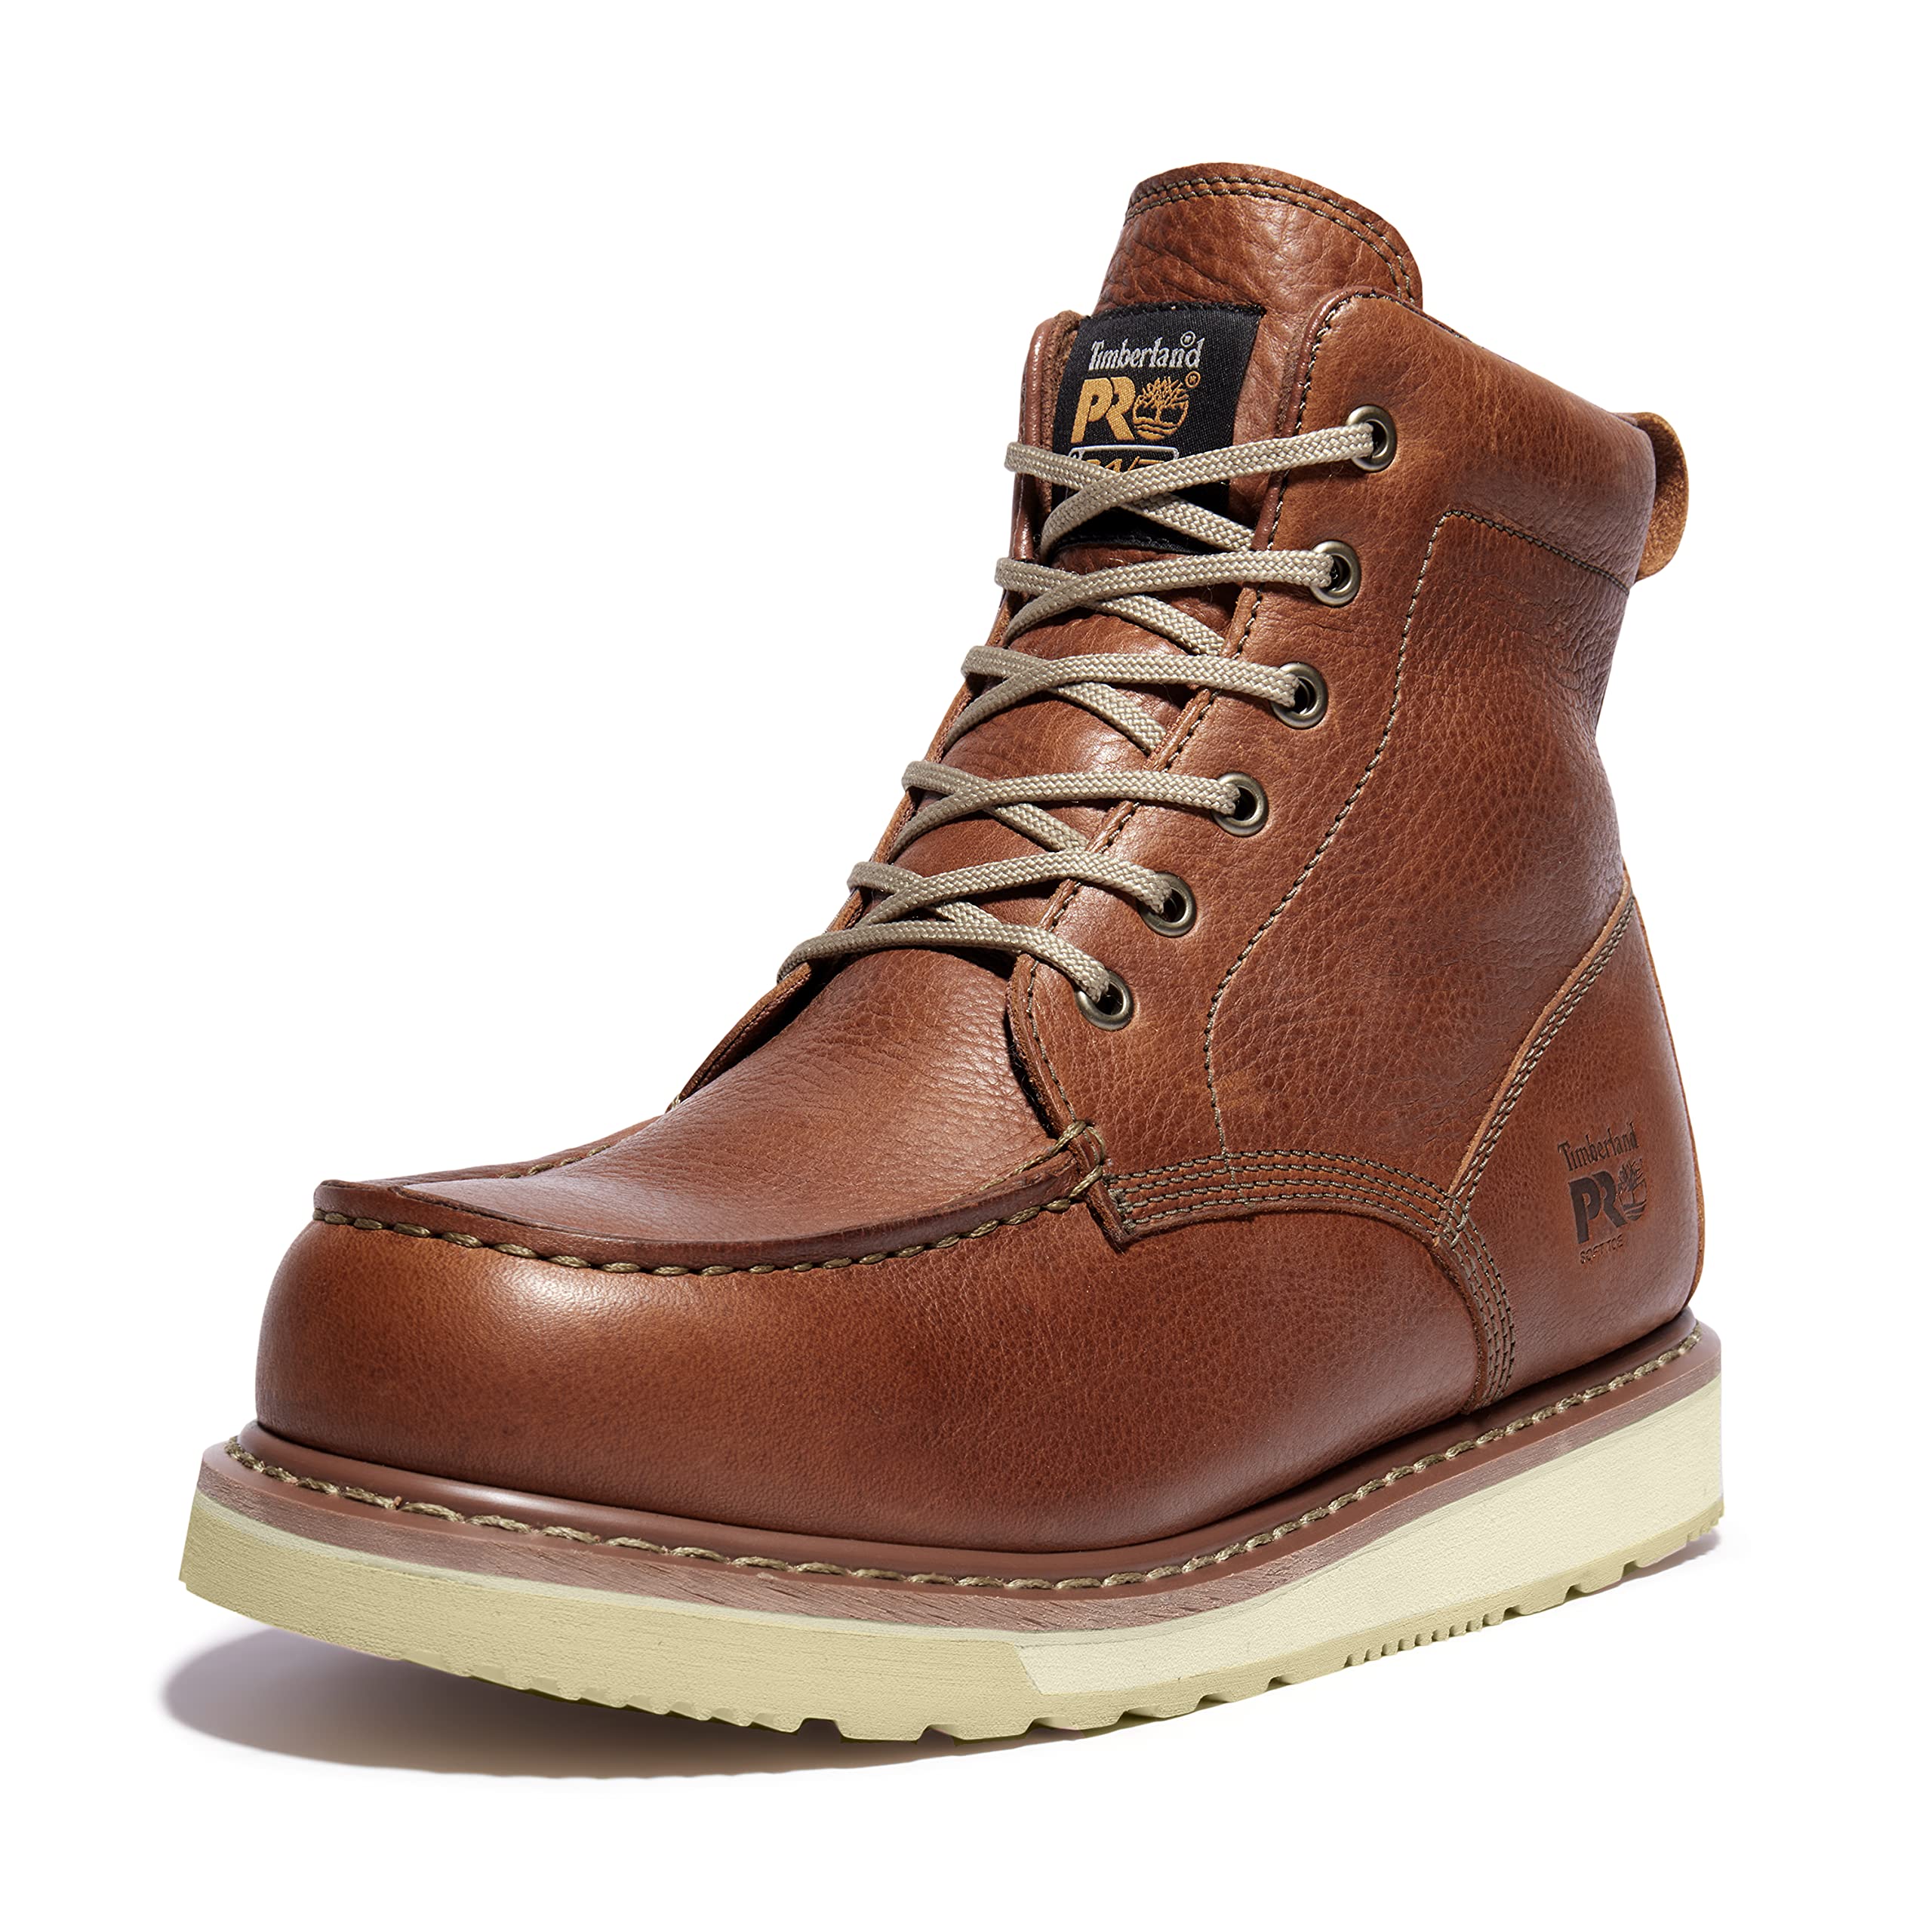 Timberland PRO Men's Pro Wedge 6 Inch Moc Soft Toe Industrial Work Boot